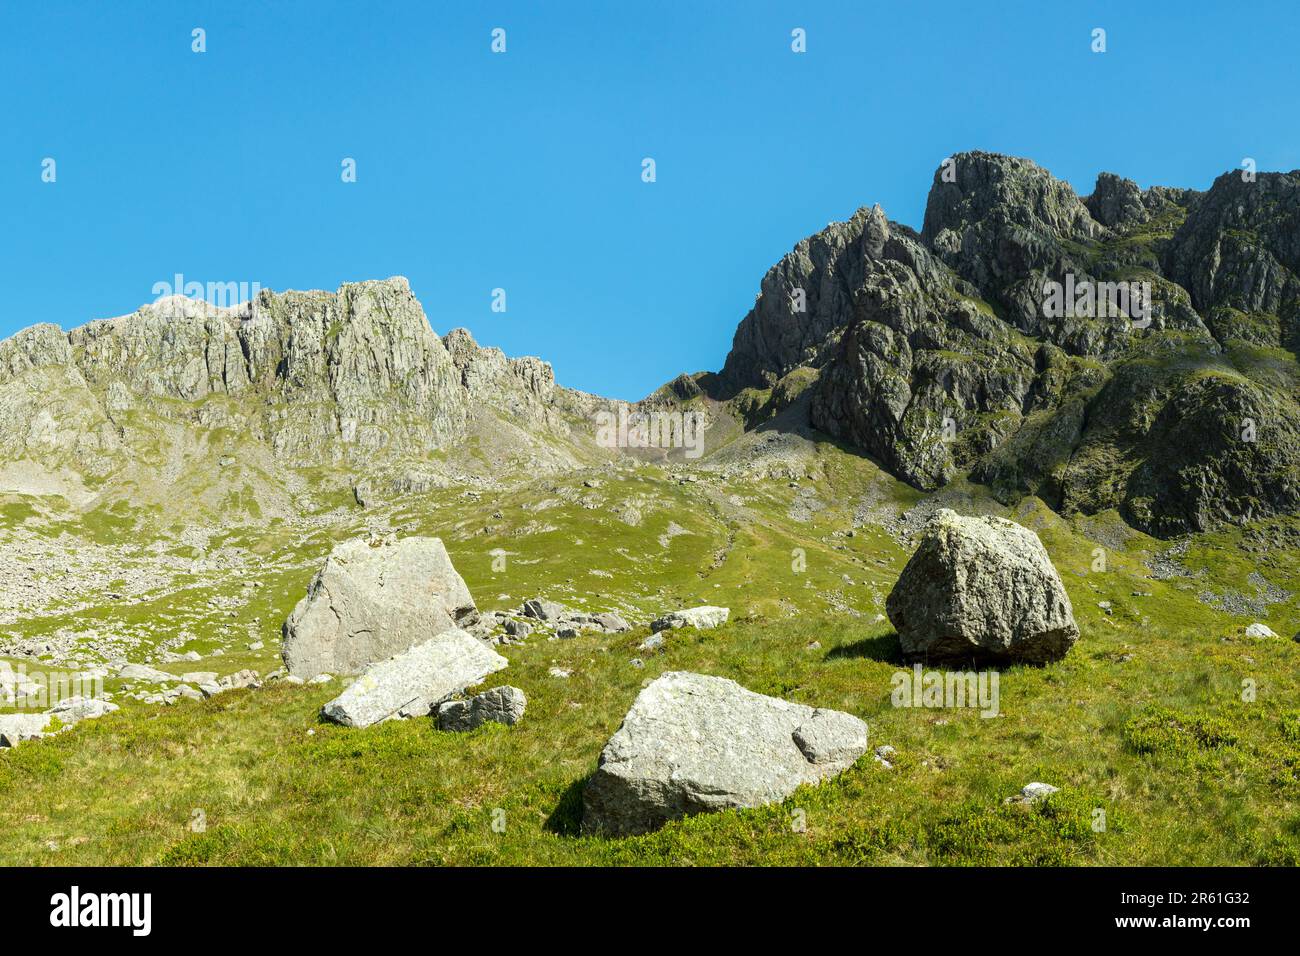 Scafell Pike, left, Mickledore, centre, Scafell (Sca fell), right, taken from Hollow Stones route. Southern Fells, Lake District, England, UK Stock Photo